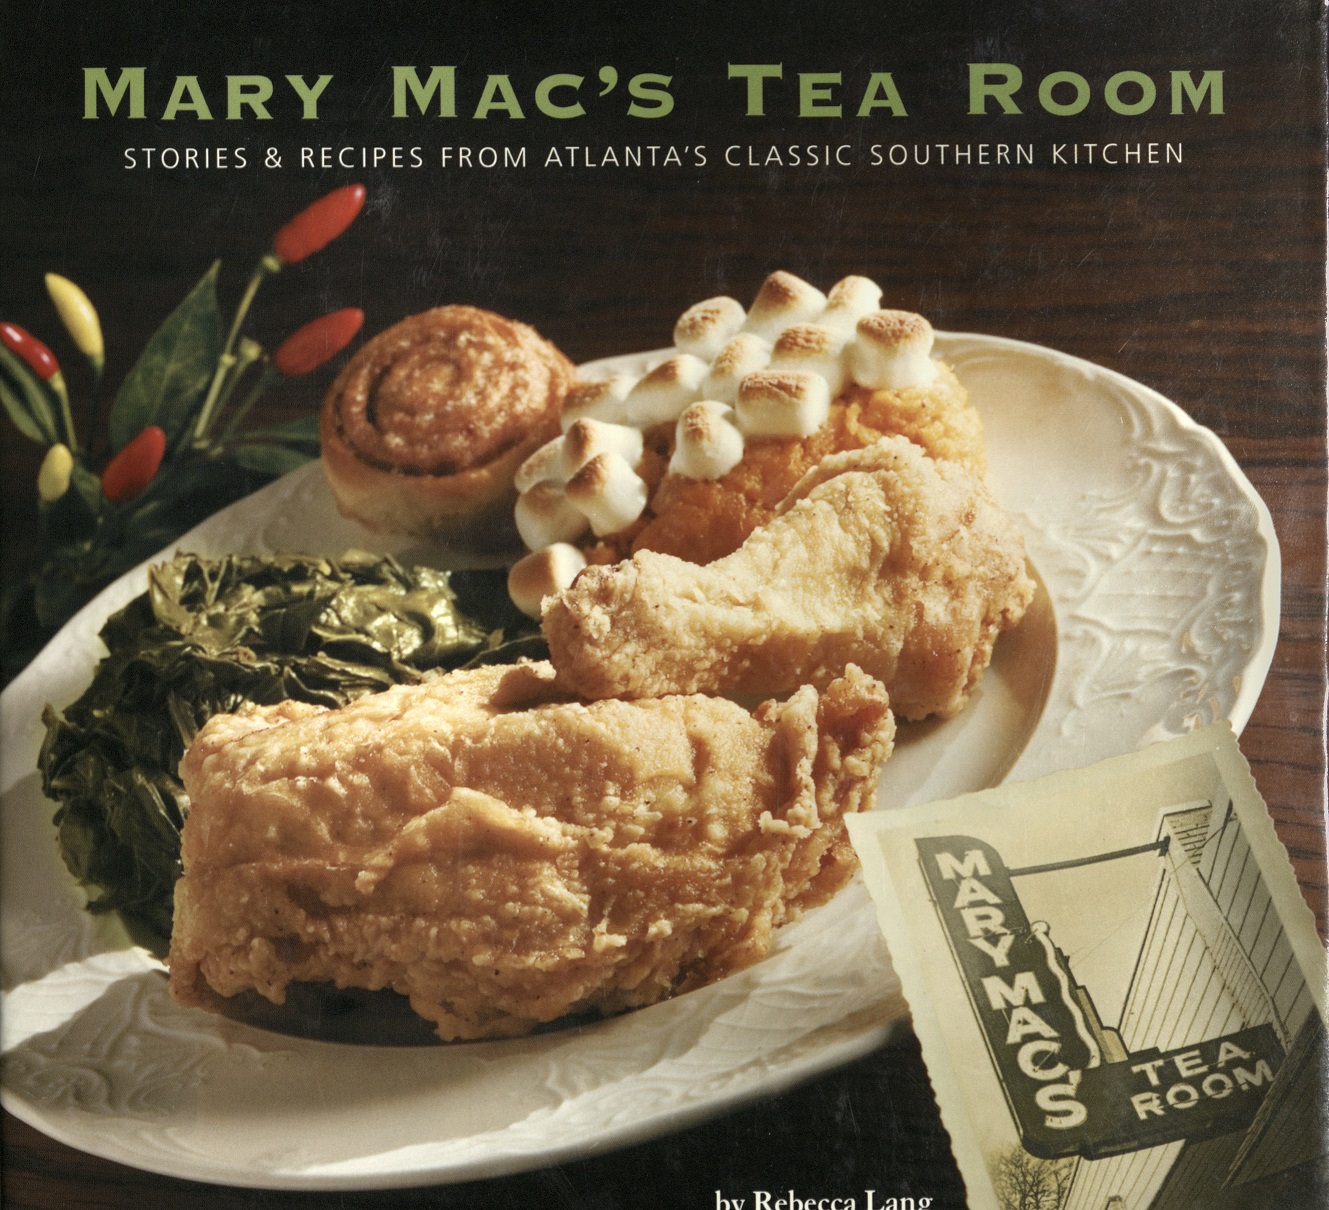 Cover of "Mary Mac